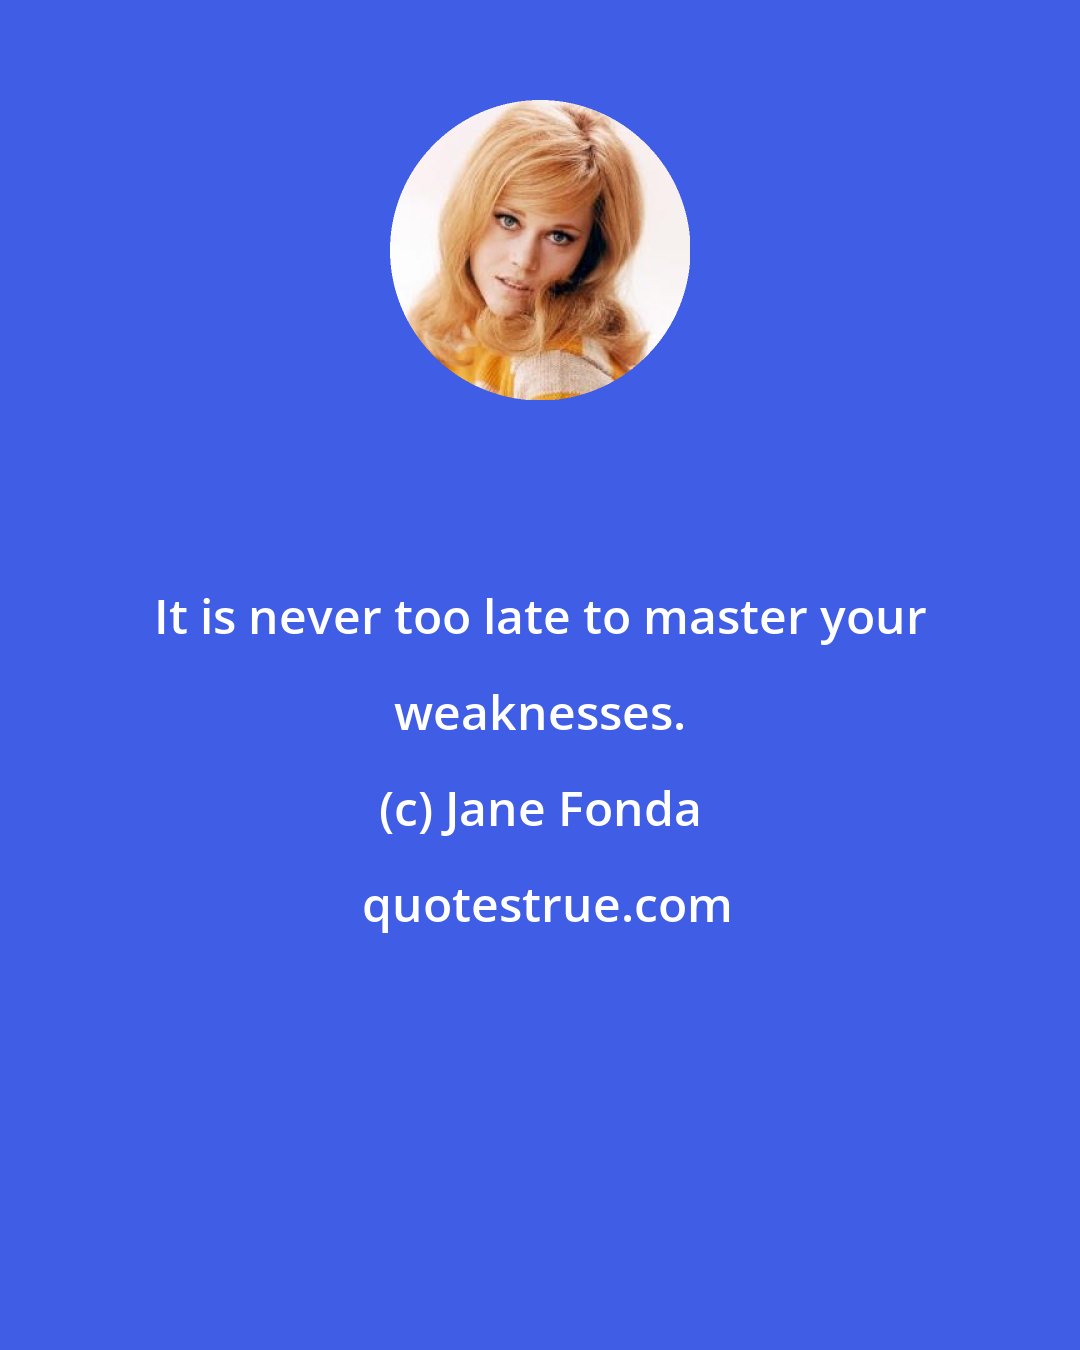 Jane Fonda: It is never too late to master your weaknesses.